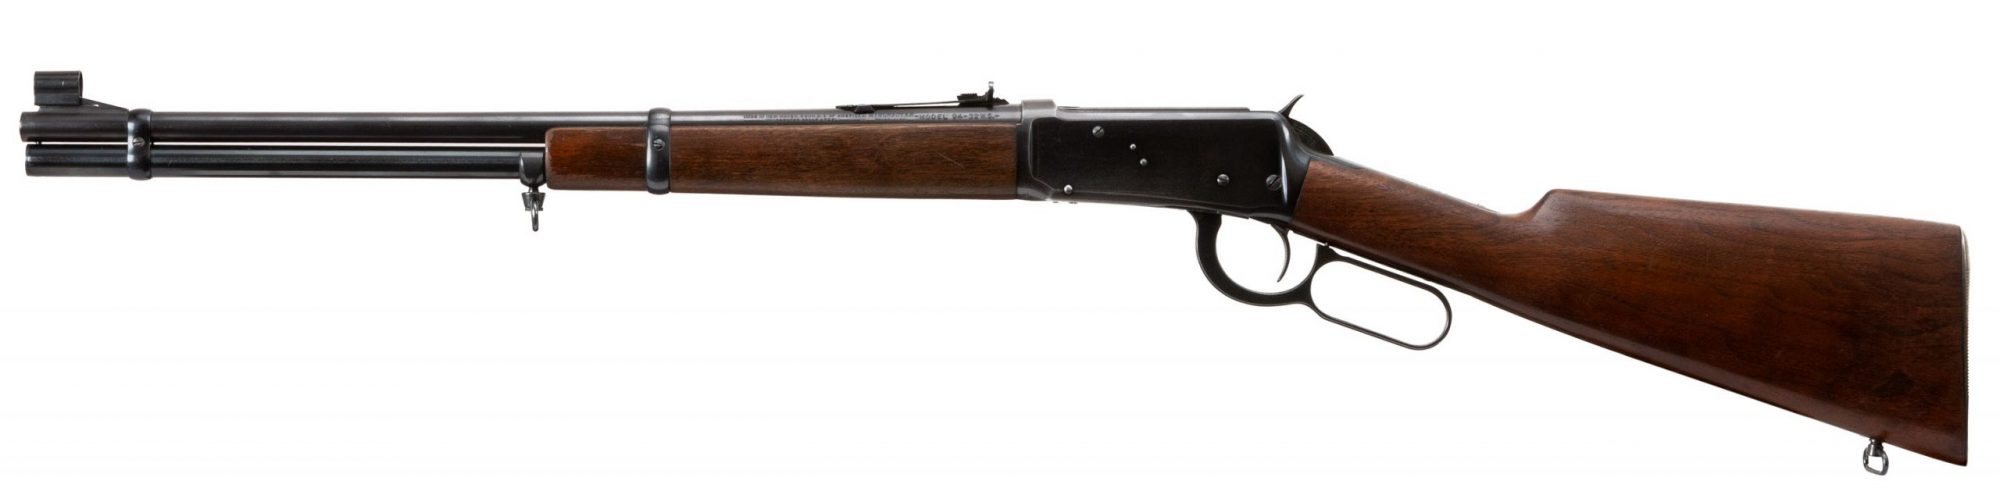 Photo of a pre-owned Winchester Model 94 Carbine from circa 1943-45, for sale by Turnbull Restoration of Bloomfield, NY